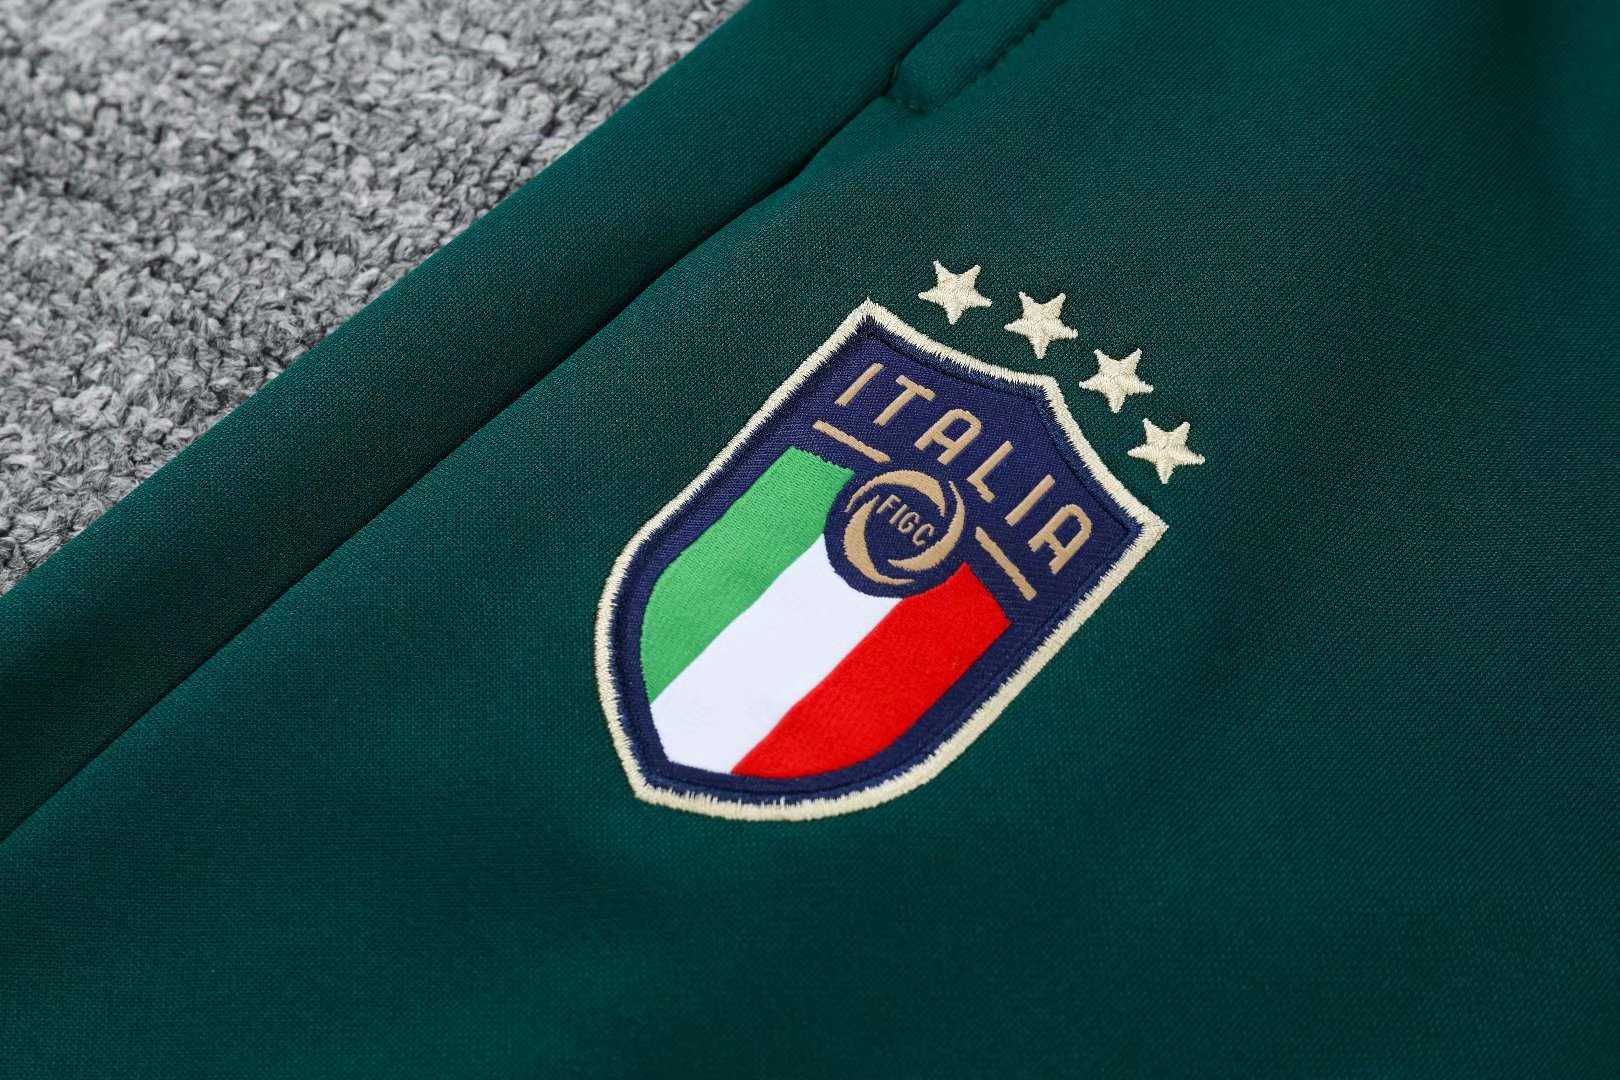 2019/20 Italy Green Soccer Training Suit (Jacket + Pants )